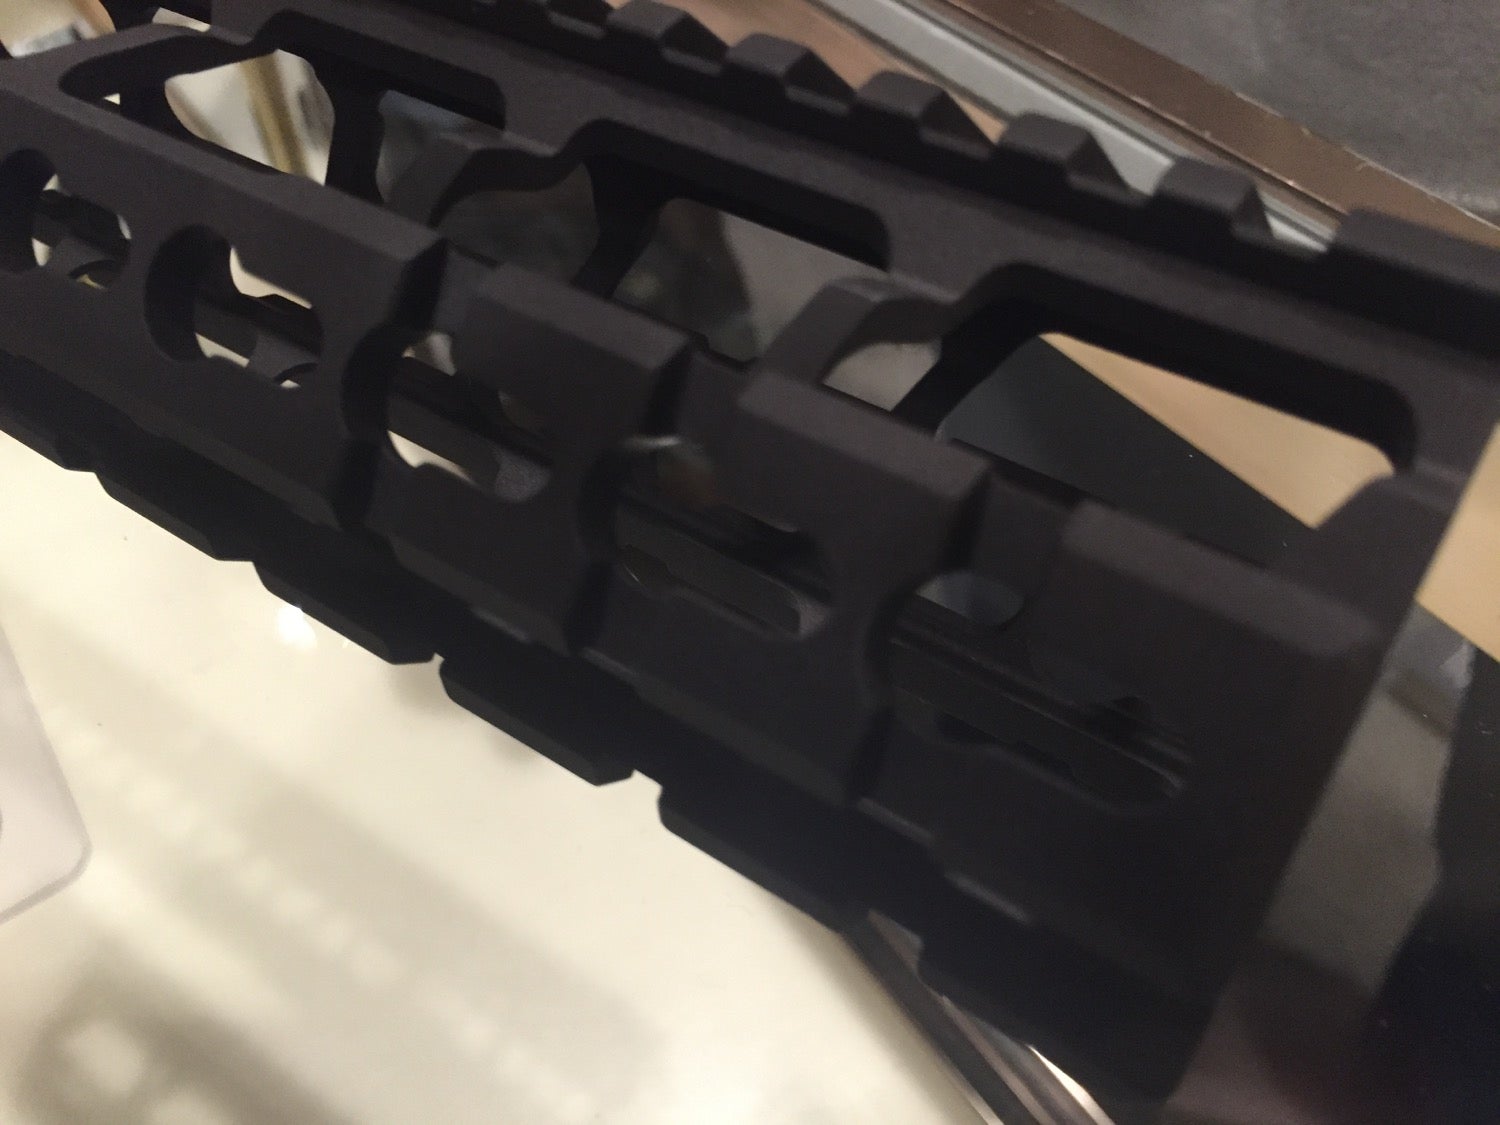 PicMod section on the handguard.